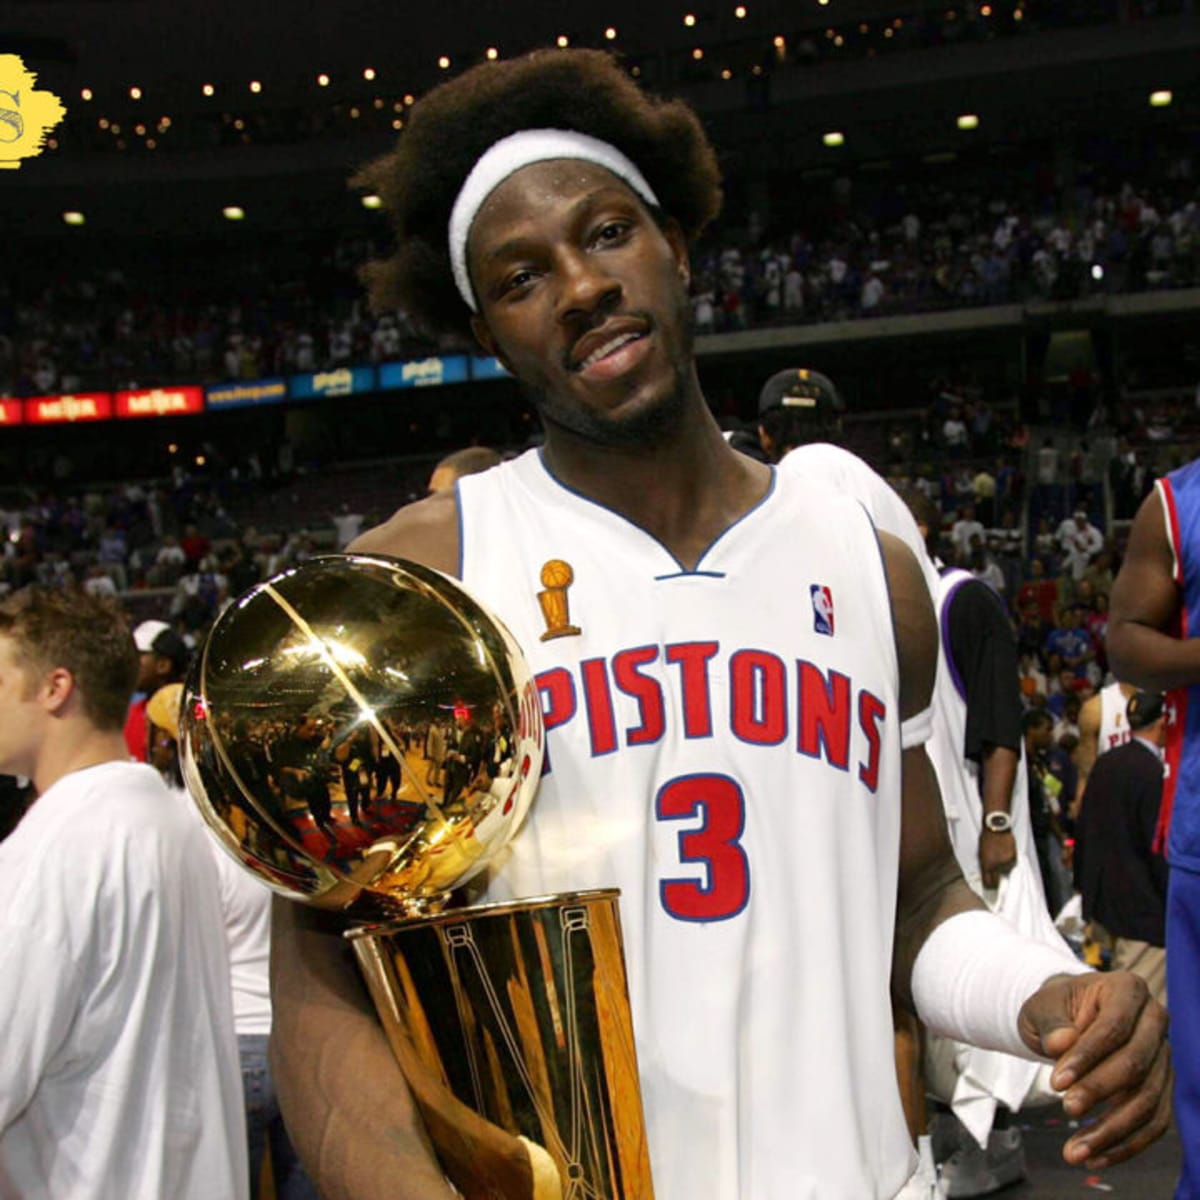 Ben Wallace motivated himself after being undrafted - Basketball Network -  Your daily dose of basketball